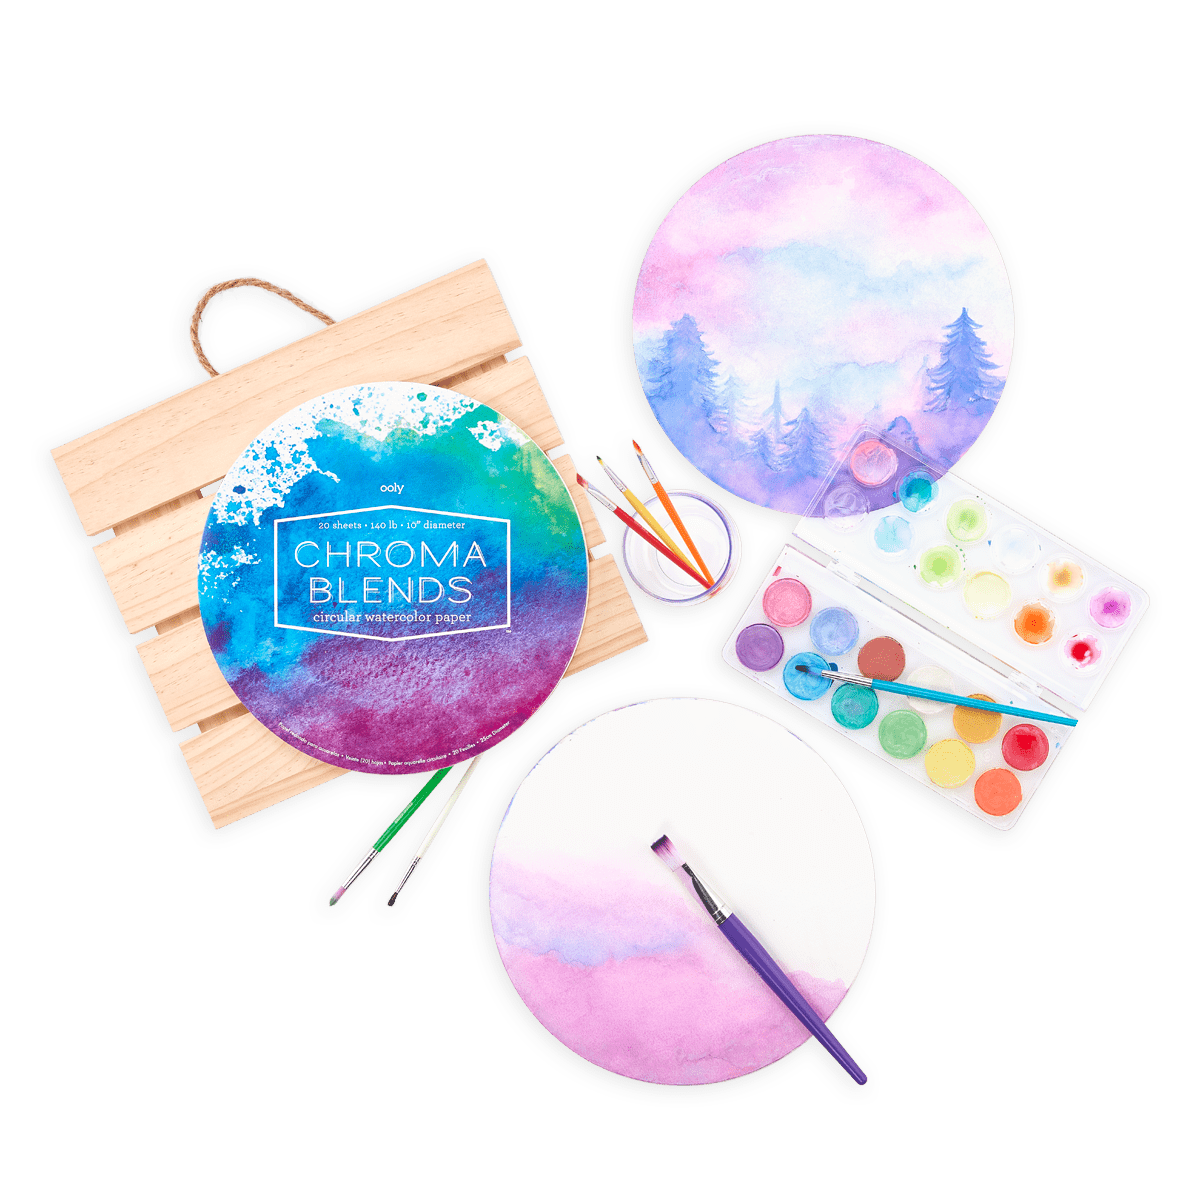 OOLY Chroma Blends Circular Watercolor Paper by OOLY